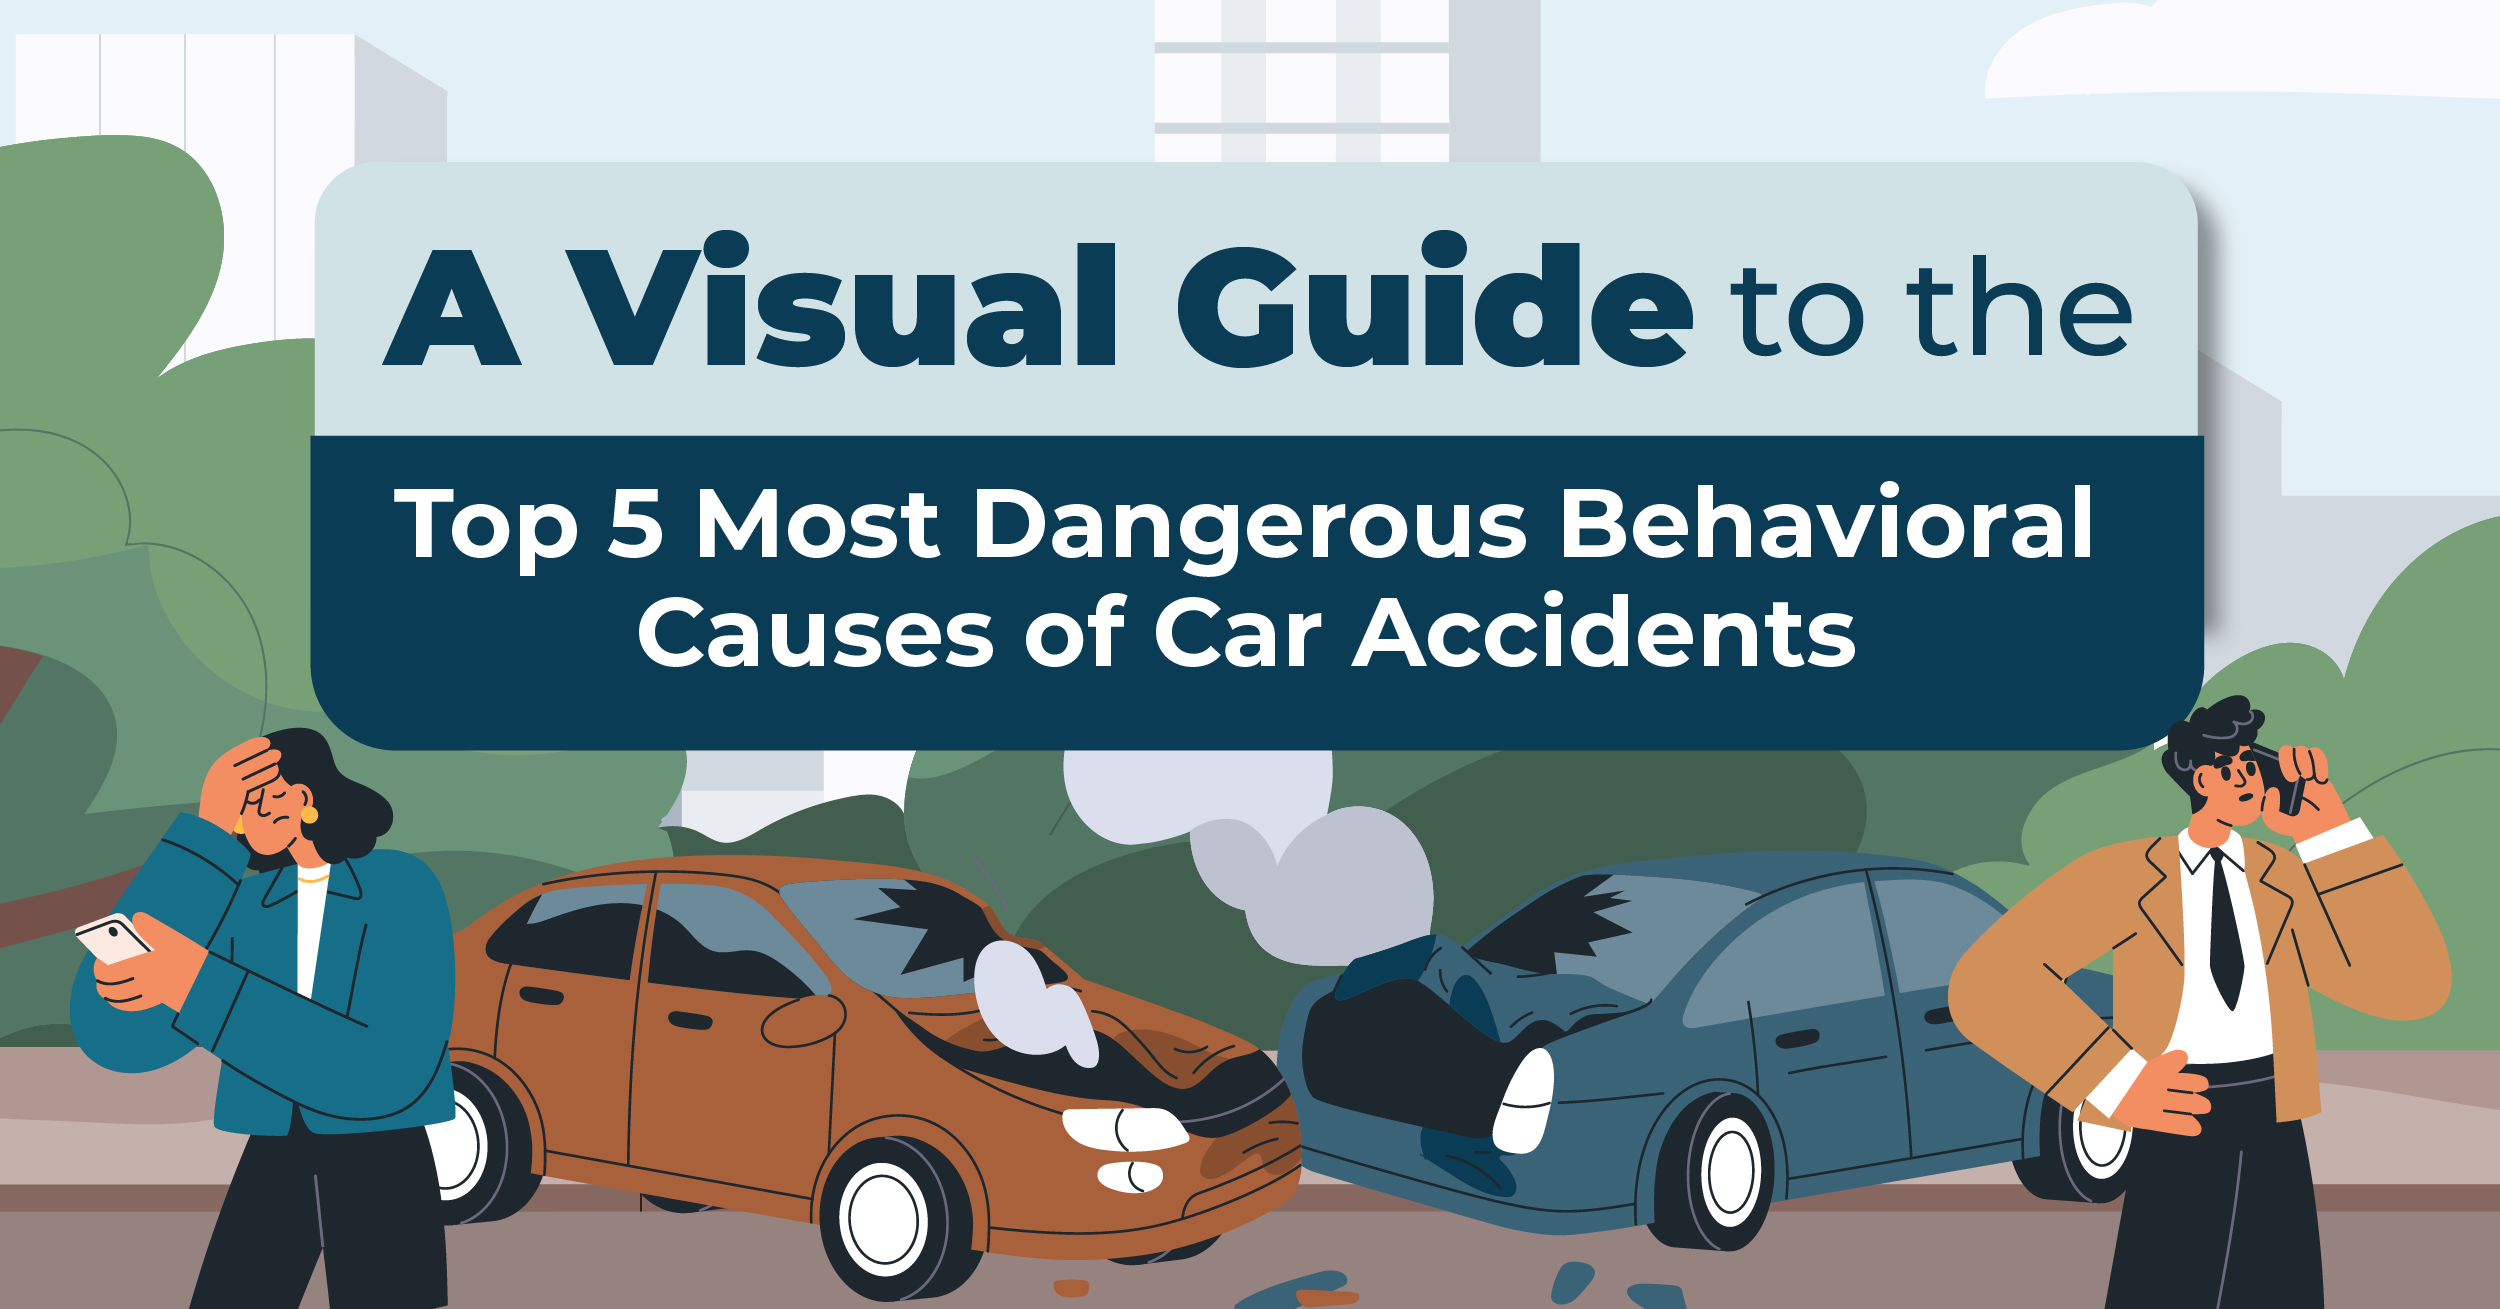 A Visual Guide to the Top 5 Most Dangerous Behavioral Causes of Car Accidents